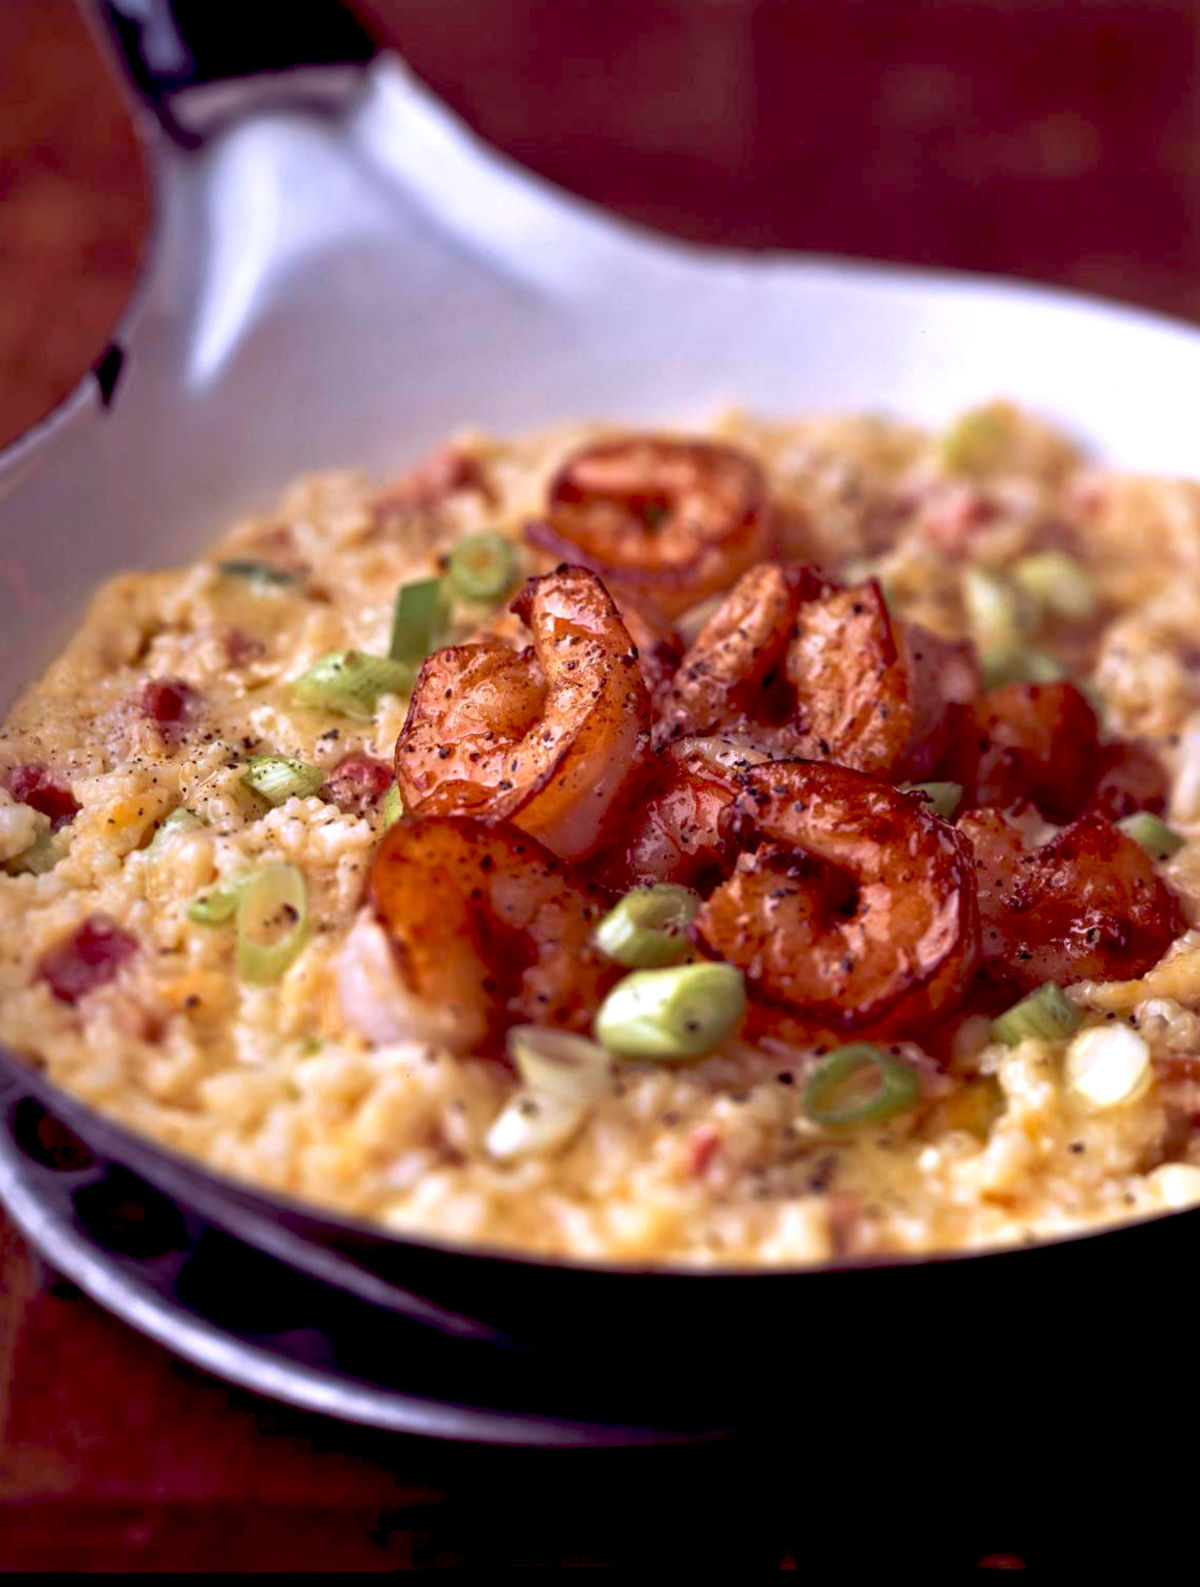 Cheddar Cheese Grits With Shrimp, Pancetta, and Scallions